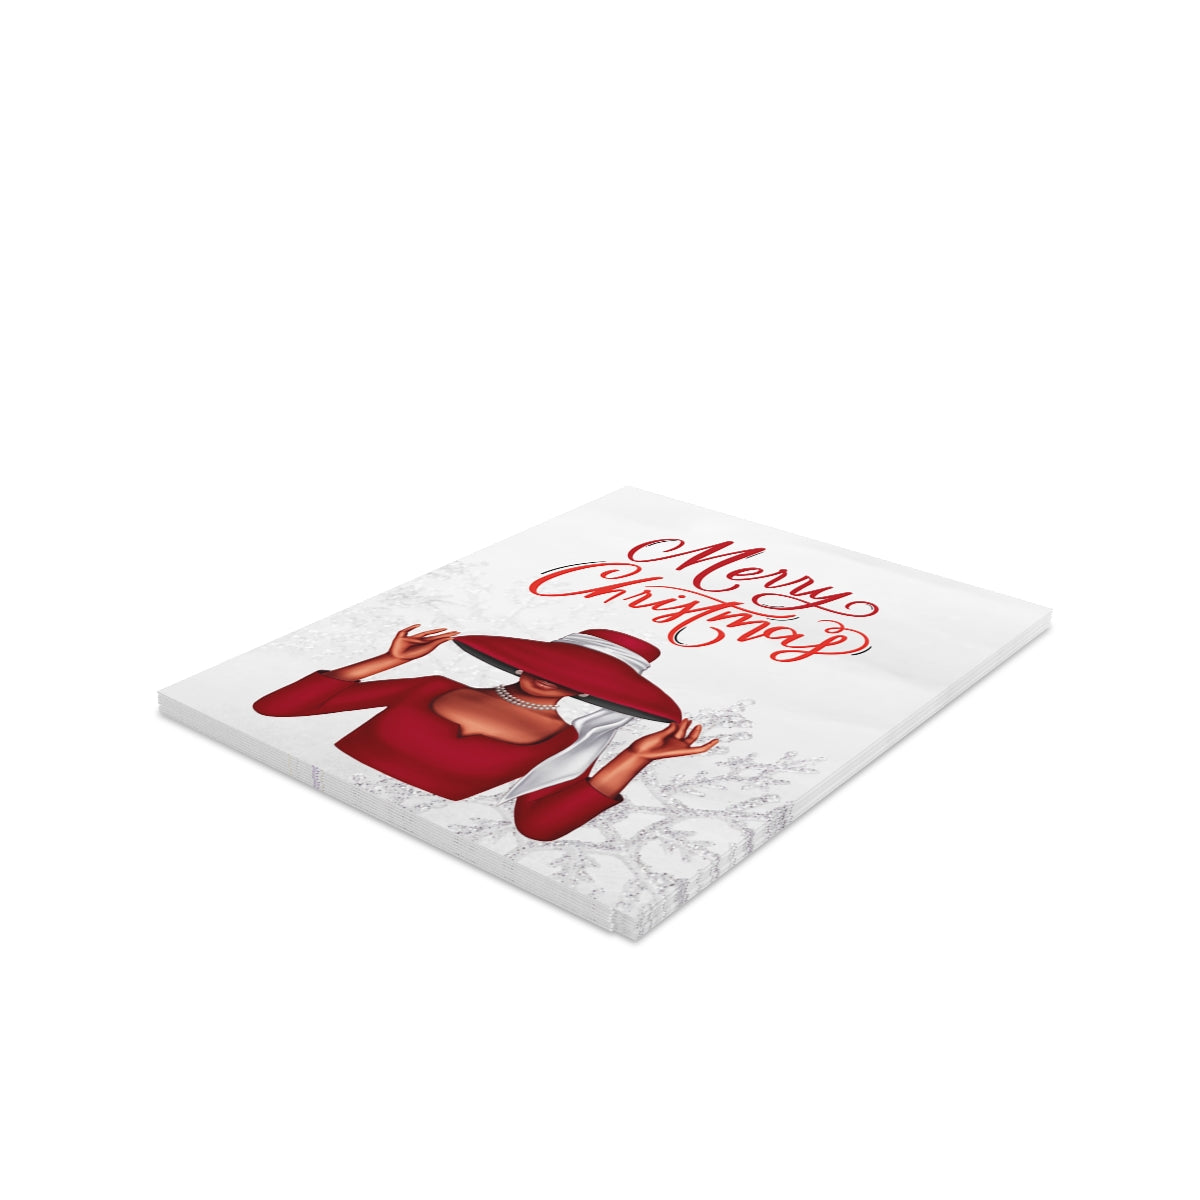 Merry Christmas Greeting cards| Postcards with Black Woman|